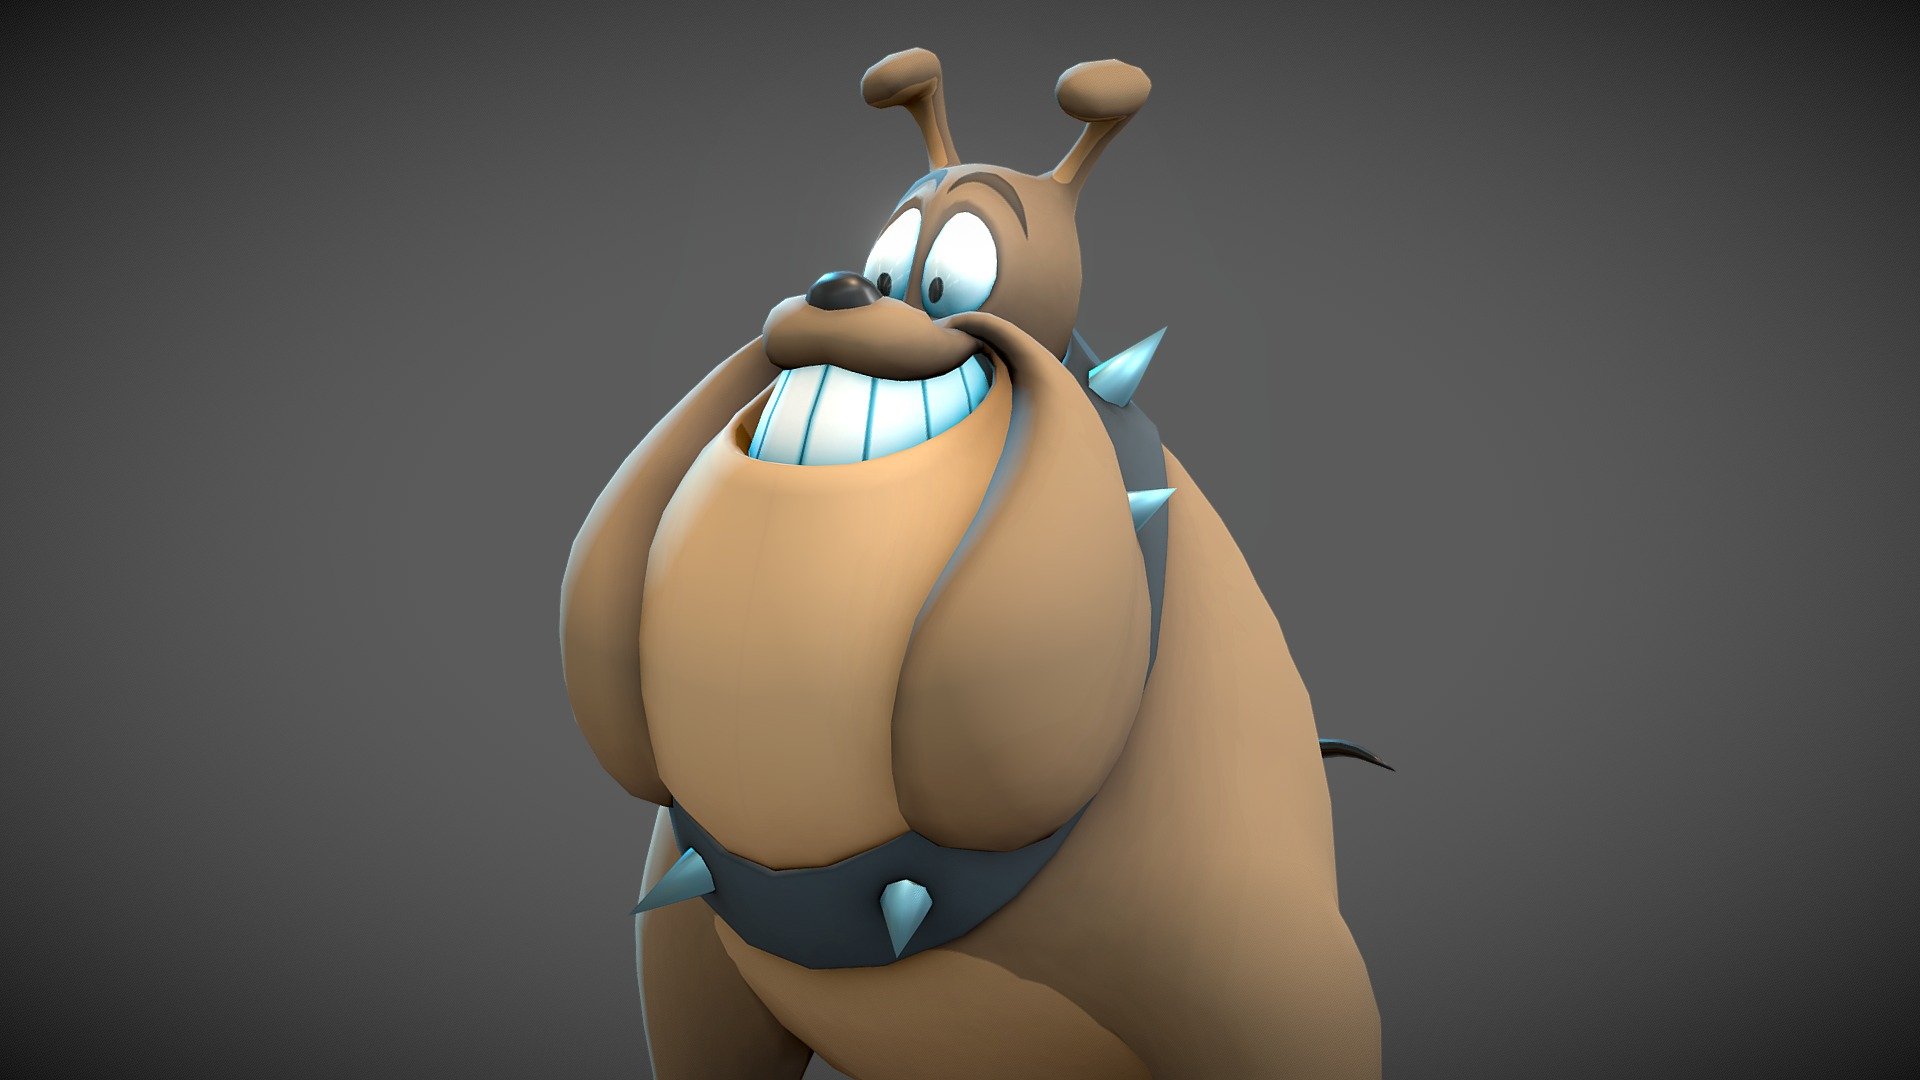 Based on an early &lsquo;Looney Tunes' character concept design by Warner Bros.:
* Sculpted in ZBrush
* Retopologized, Rigged &amp; Animated in Maya
* Textured in Photoshop - Stylized BullDog - 3D model by Urk-Hi (@UrkHai) 3d model